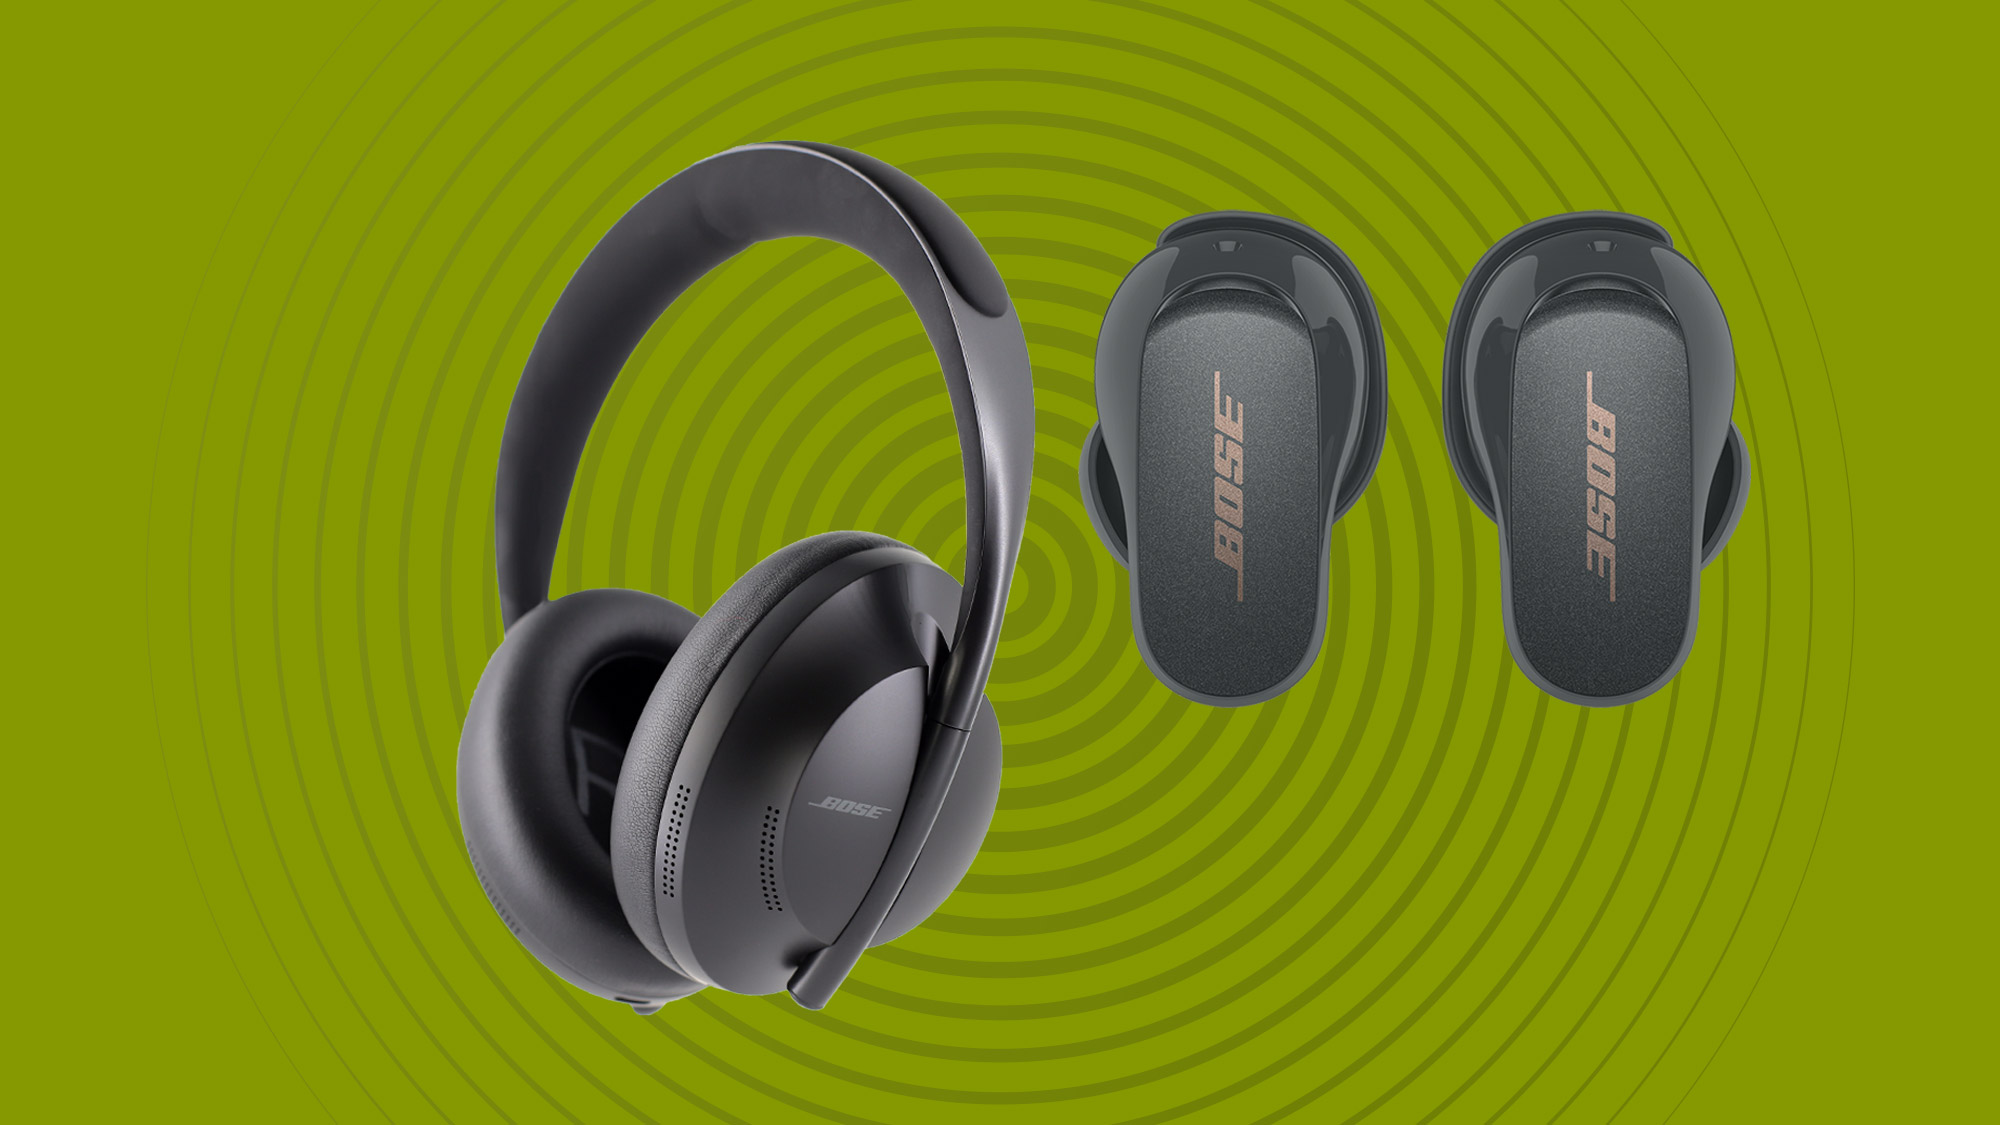 Bose QC35 II review: The best noise-canceling headphones money can buy